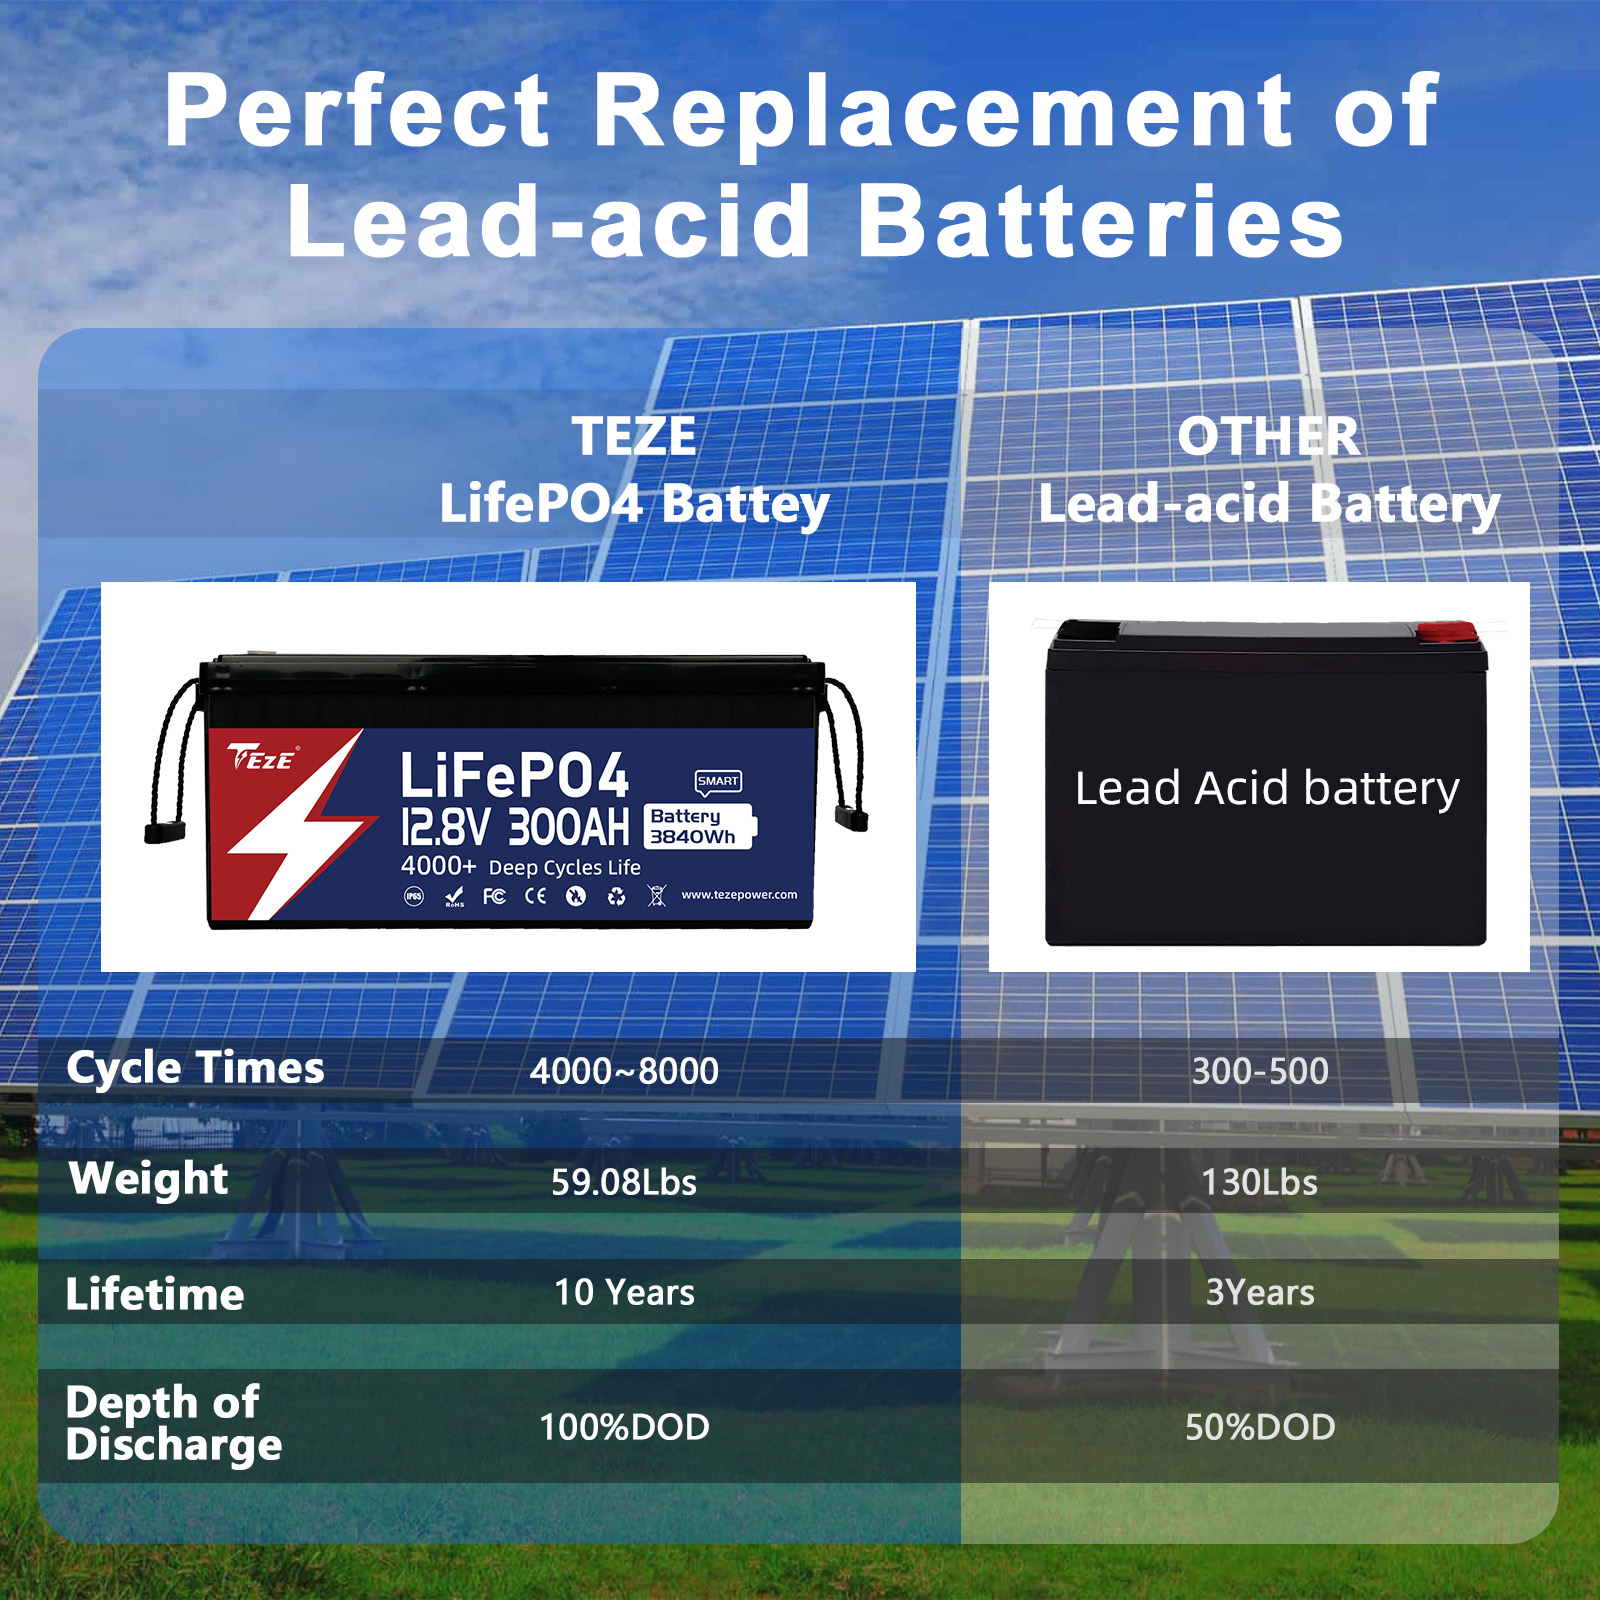 Temgot LiFePO4 Battery 12V 300Ah Lithium Battery - Built-in Bluetooth,  5000+ Cycles, Perfect for Replacing Most of Backup Power, Home Energy  Storage